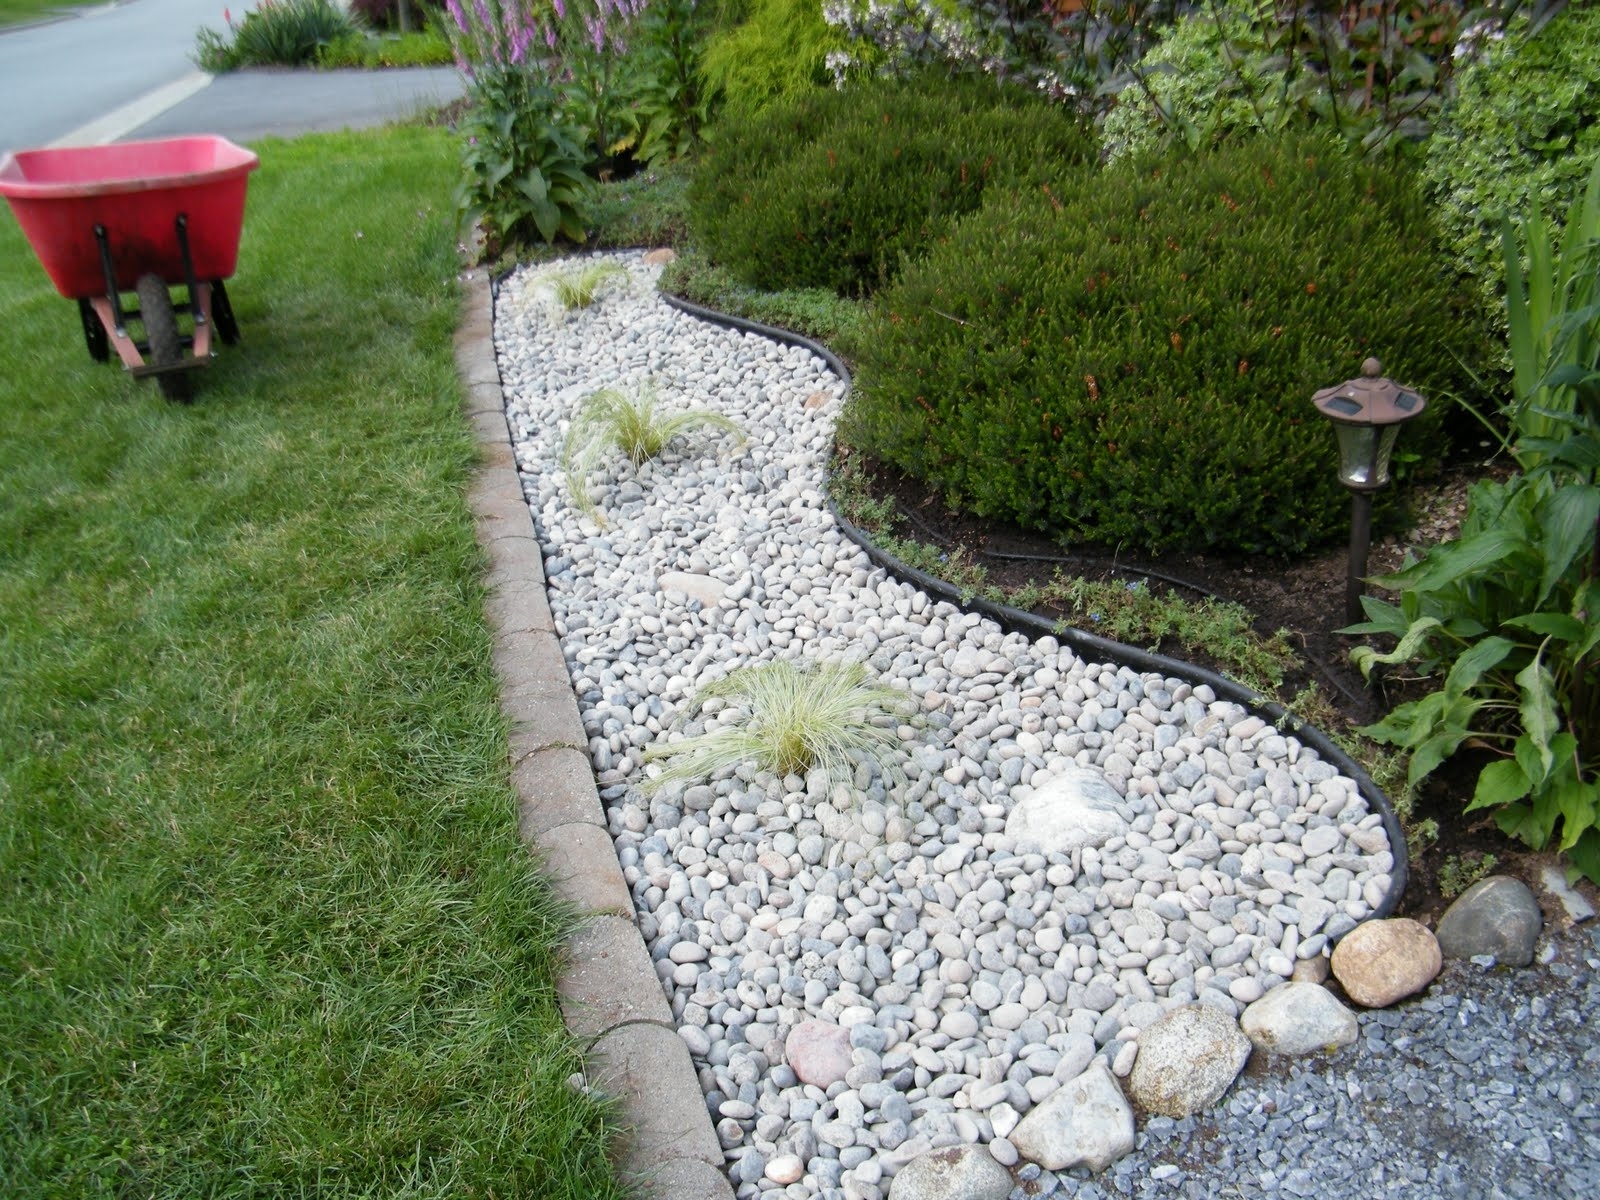 Are Small White Rocks Ok To Use For Landscaping